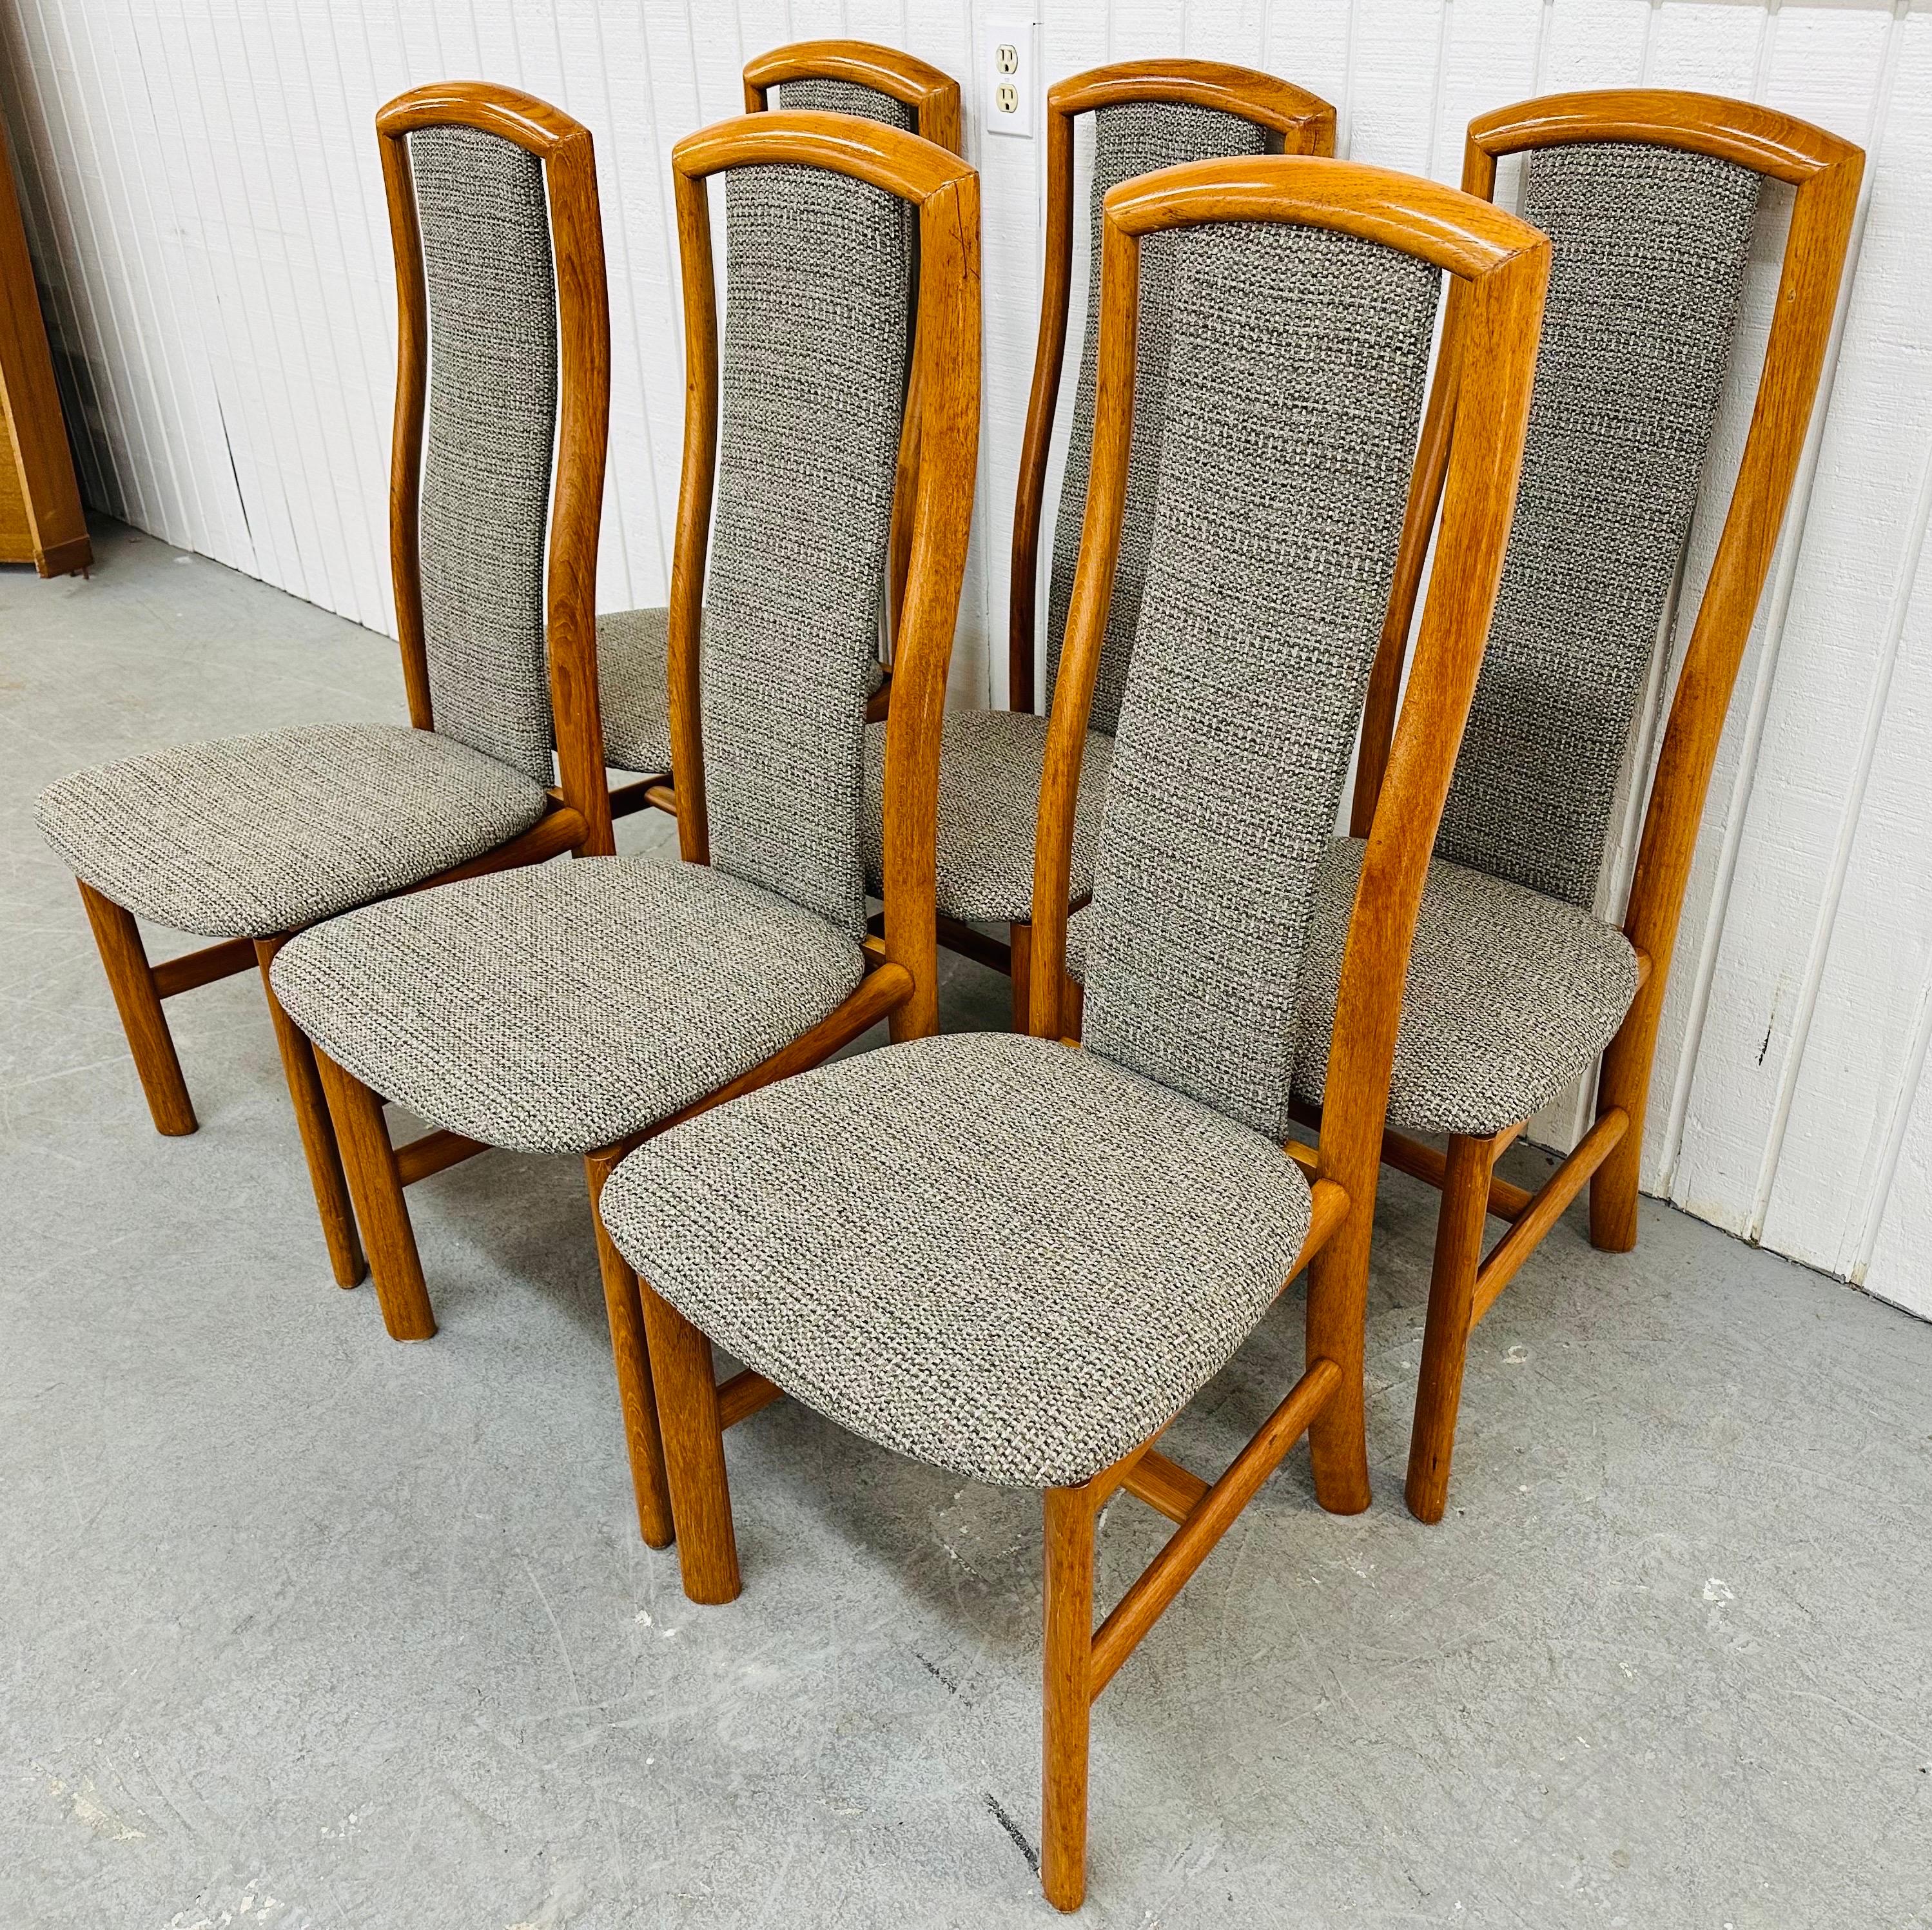 This listing is for a set of Vintage Danish Modern Teak Dining Chairs. Featuring a high back design, solid wood teak frames, and new gray upholstery. This is an exceptional combination of quality and design by Skovby!